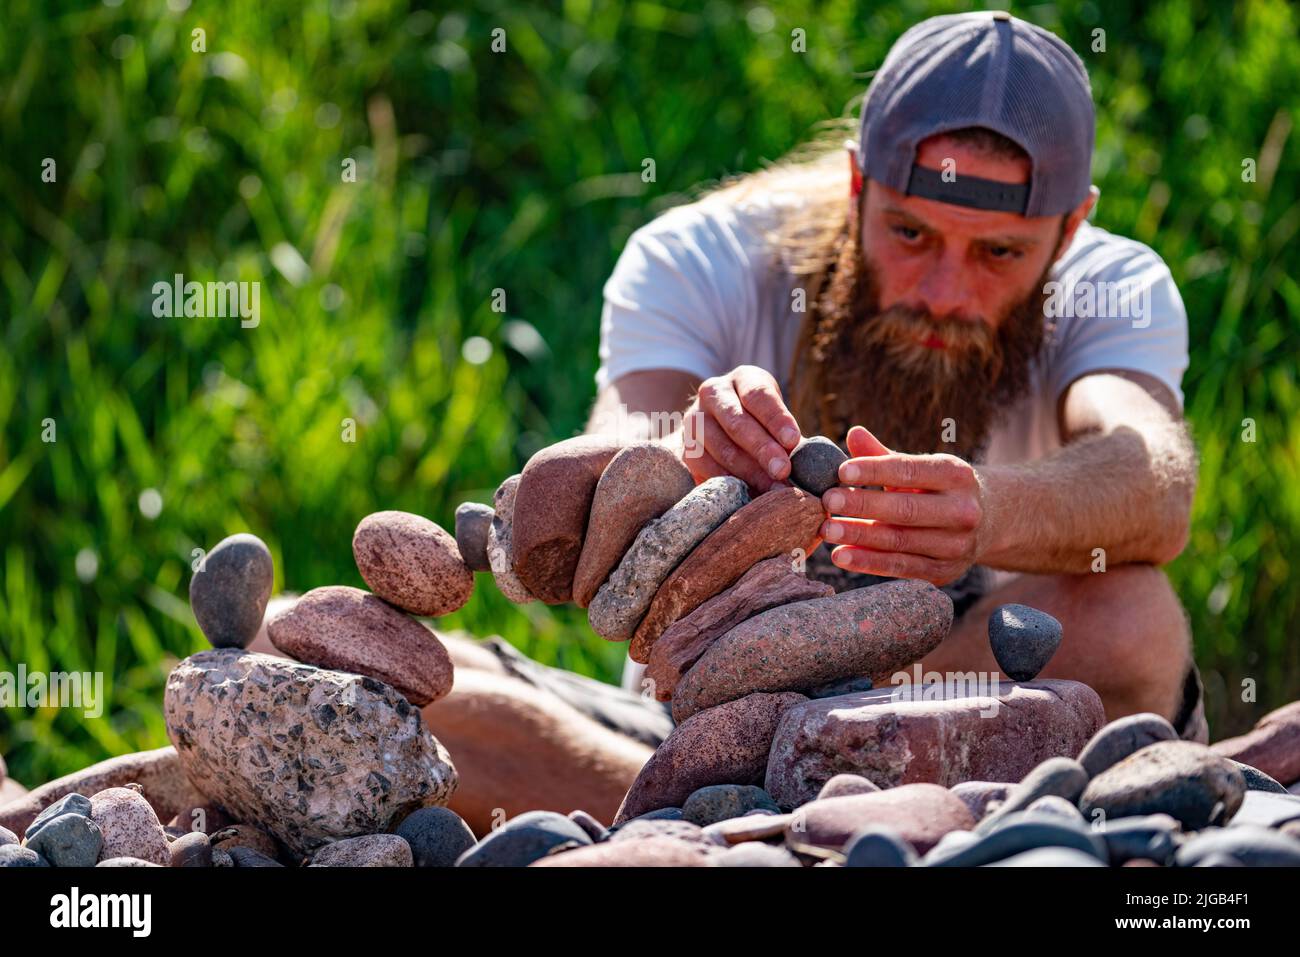 Dunbar, Scotland, UK. 9 July 2022. Day one of the 11th Stone Stacking Championships held at Eye Cave Beach in Dunbar in East Lothian. . Competitors are shown during the arch building competition. Pic; John Foreman concentrates on his stone arch. ain Masterton/Alamy Live News Stock Photo